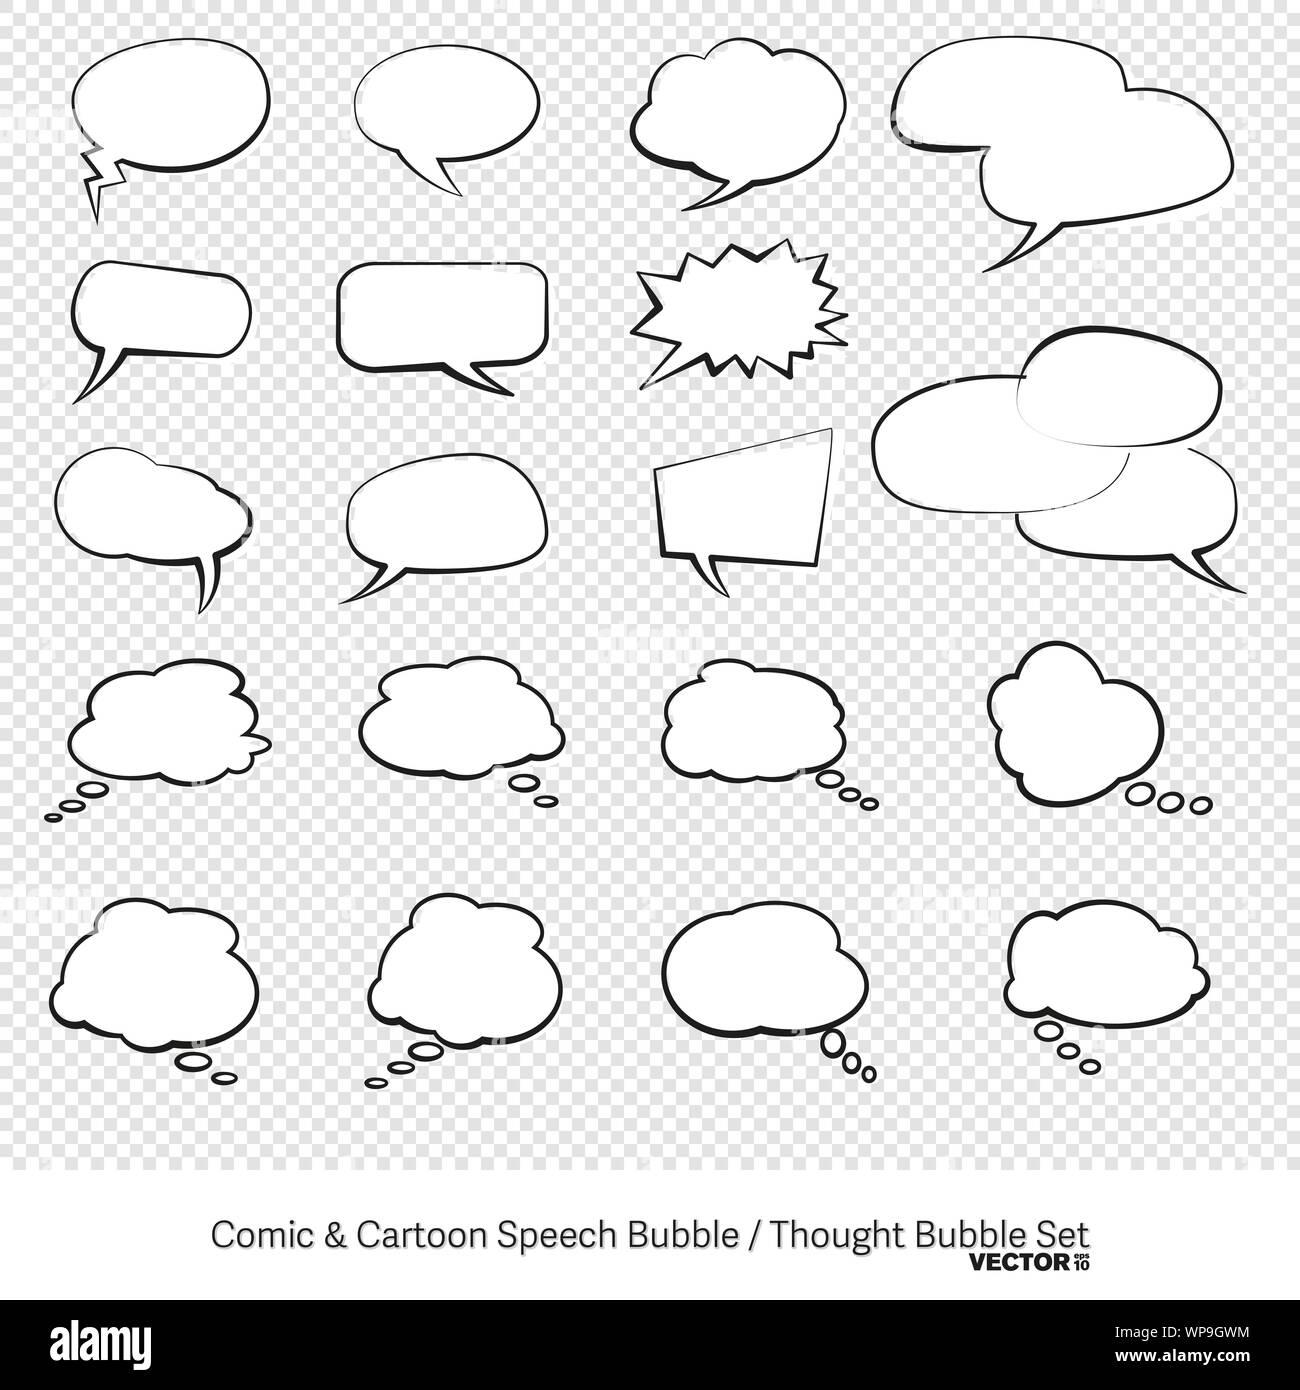 comic and cartoon speech bubble and thought bubble icon set vector illustration Stock Vector